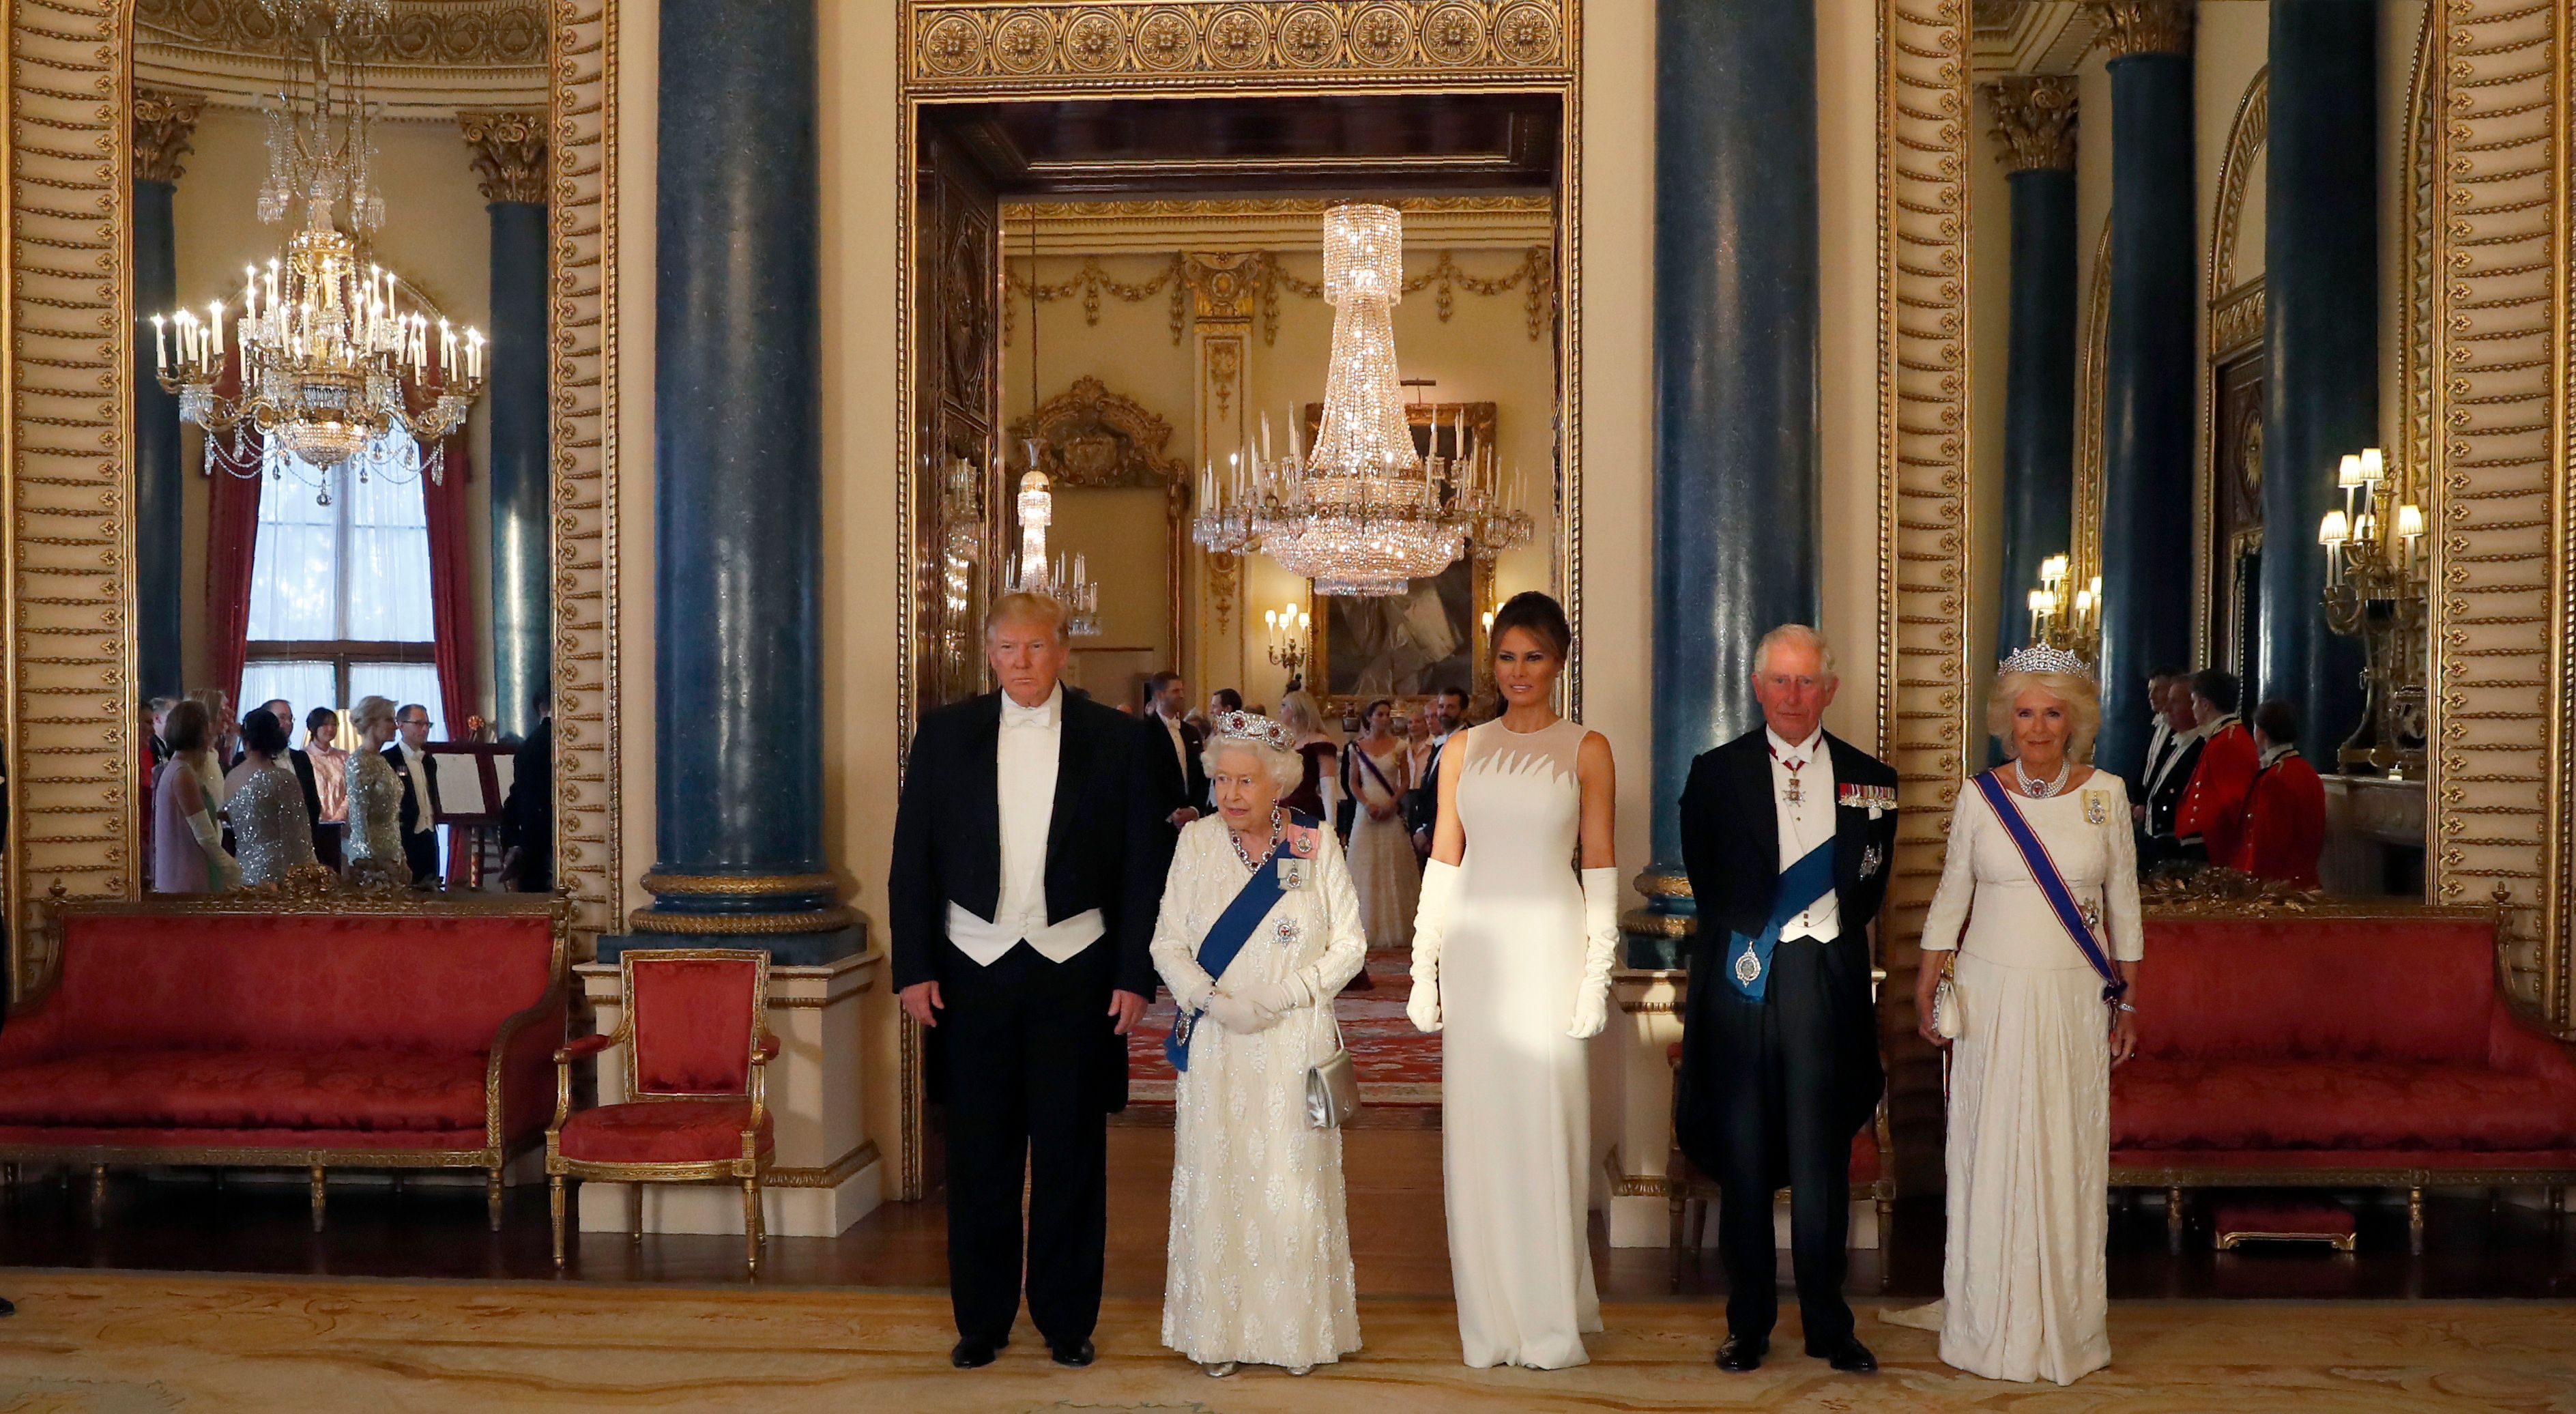 US President Donald Trump, Britain's Queen Elizabeth II, US First Lady Melania Trump, Britain's Prince Charles, Prince of Wales and Britain's Camilla, Duchess of Cornwall (R) pose for a photograph ahead of a State Banquet at Buckingham Palace, London, June 3, 2019.